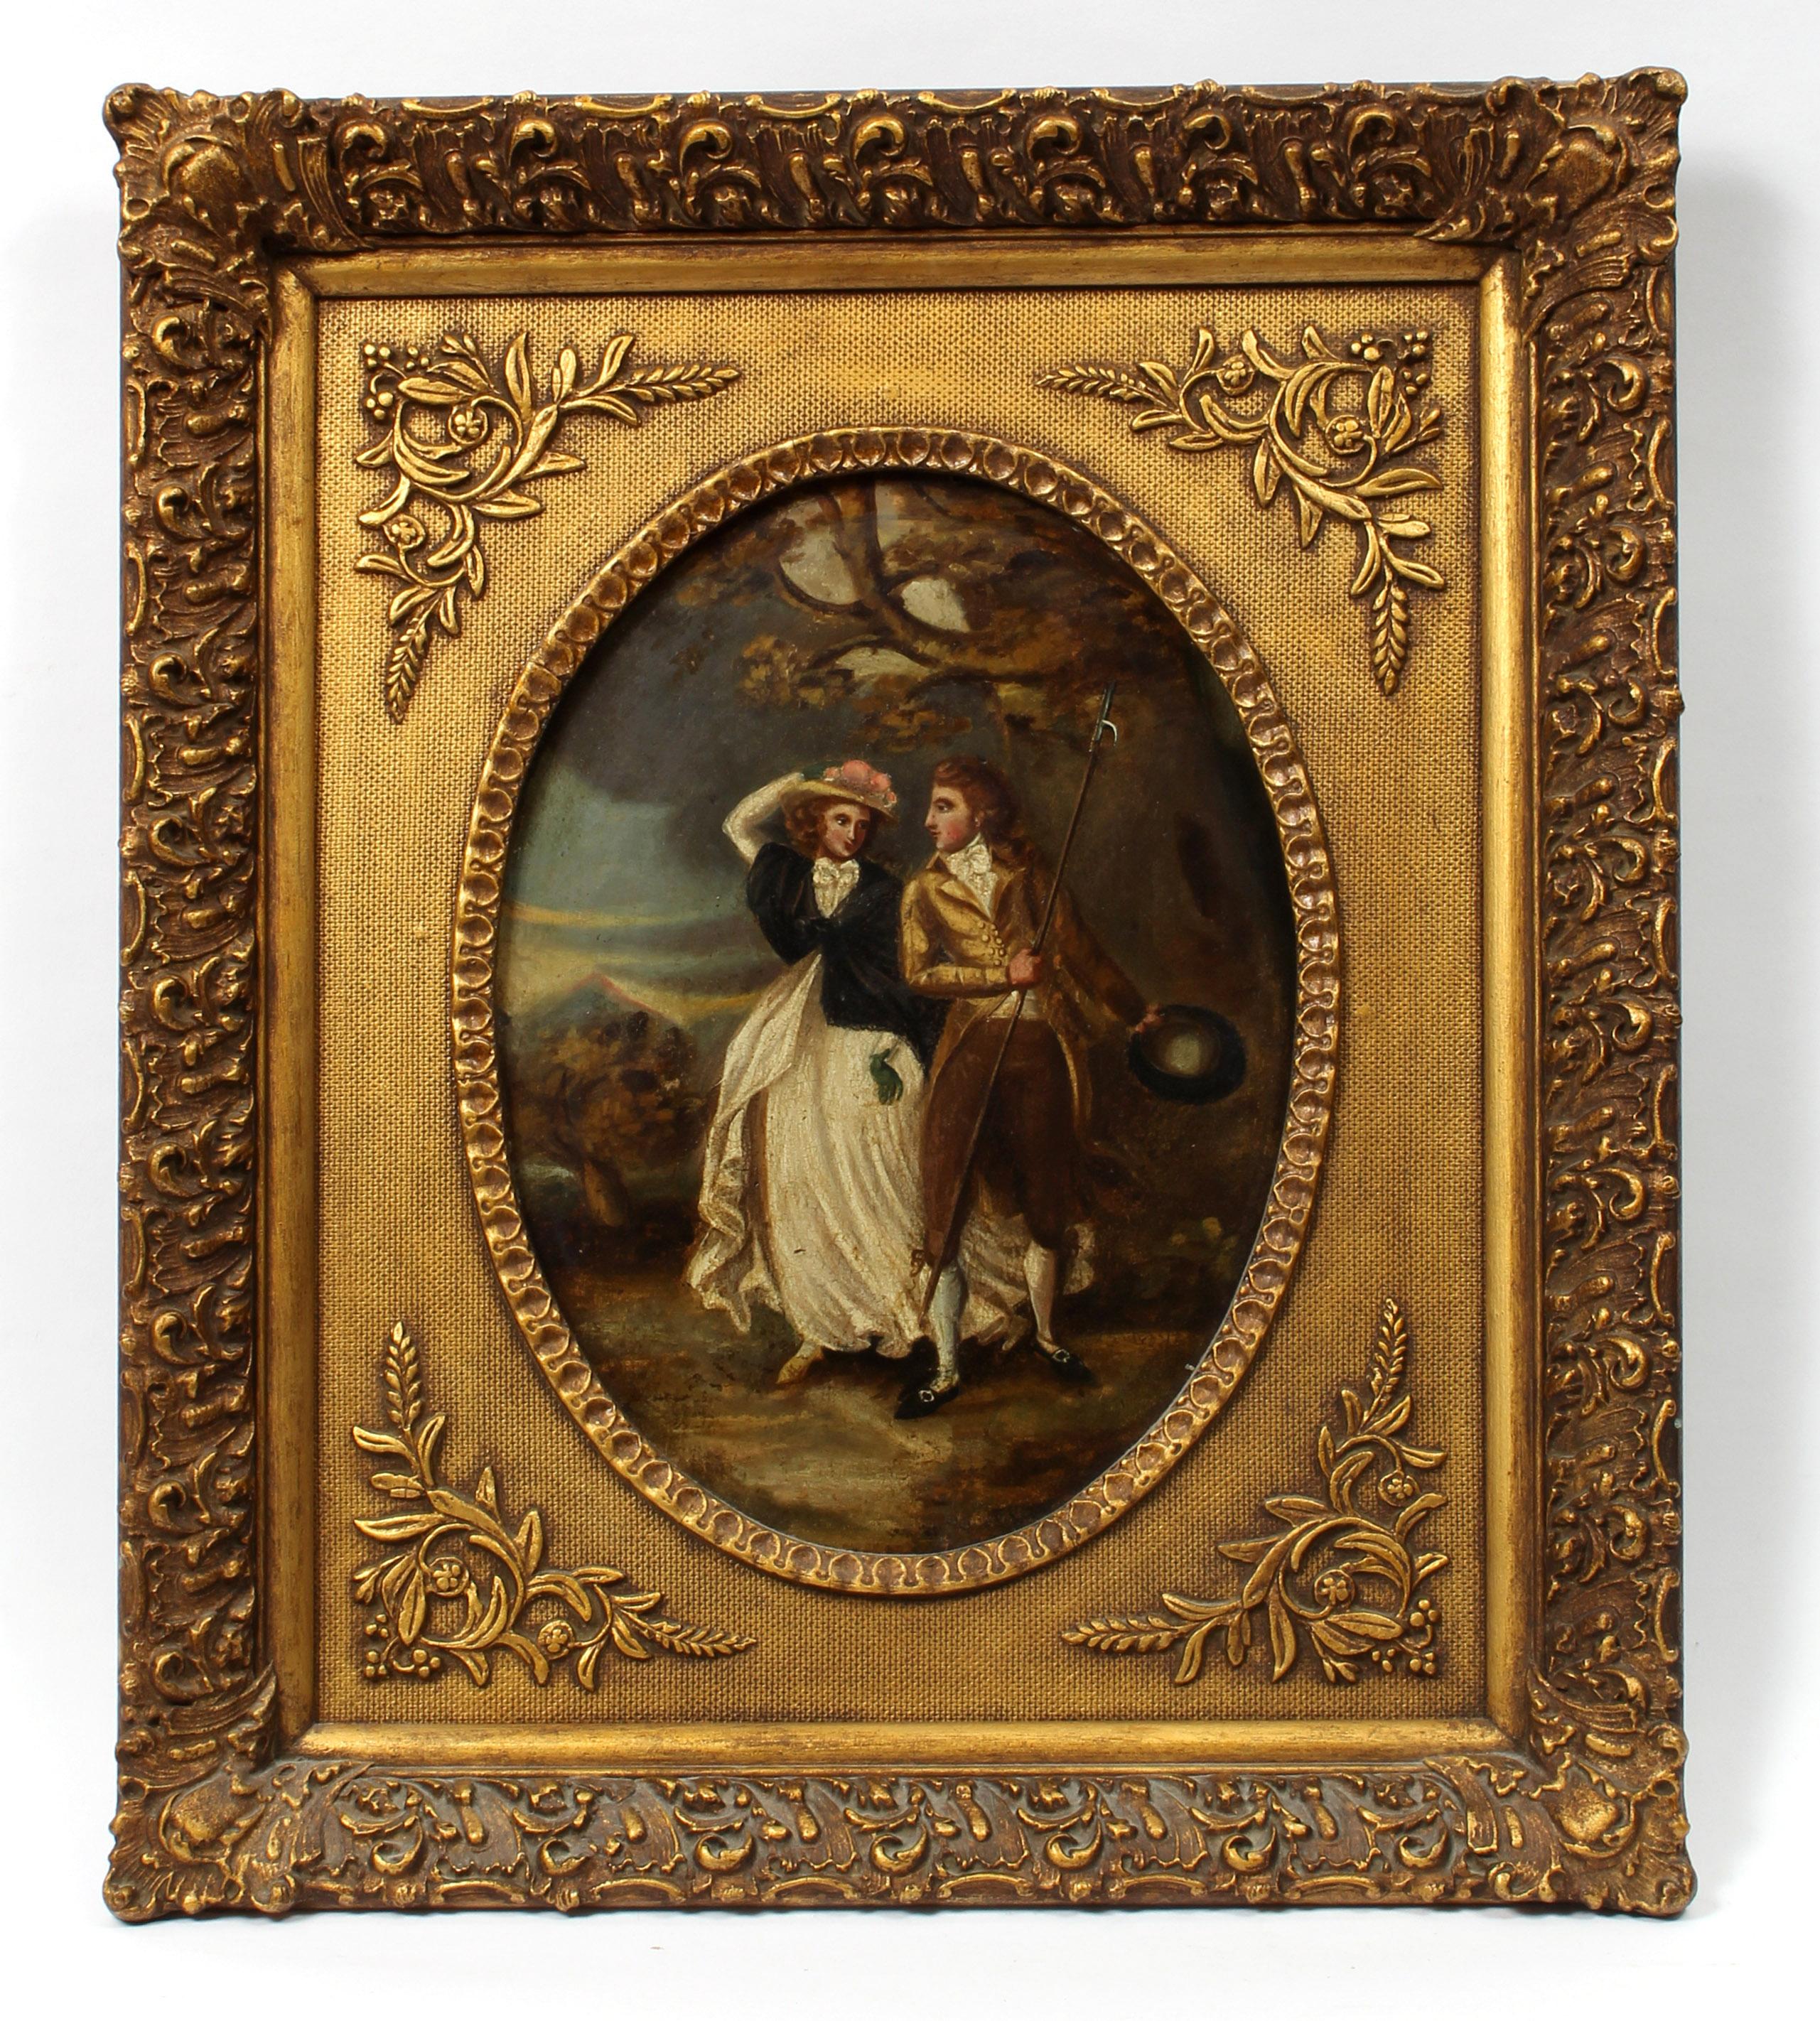 Unknown Figurative Painting - Antique American Oil Painting Framed Couple Landscape Period 19th Century